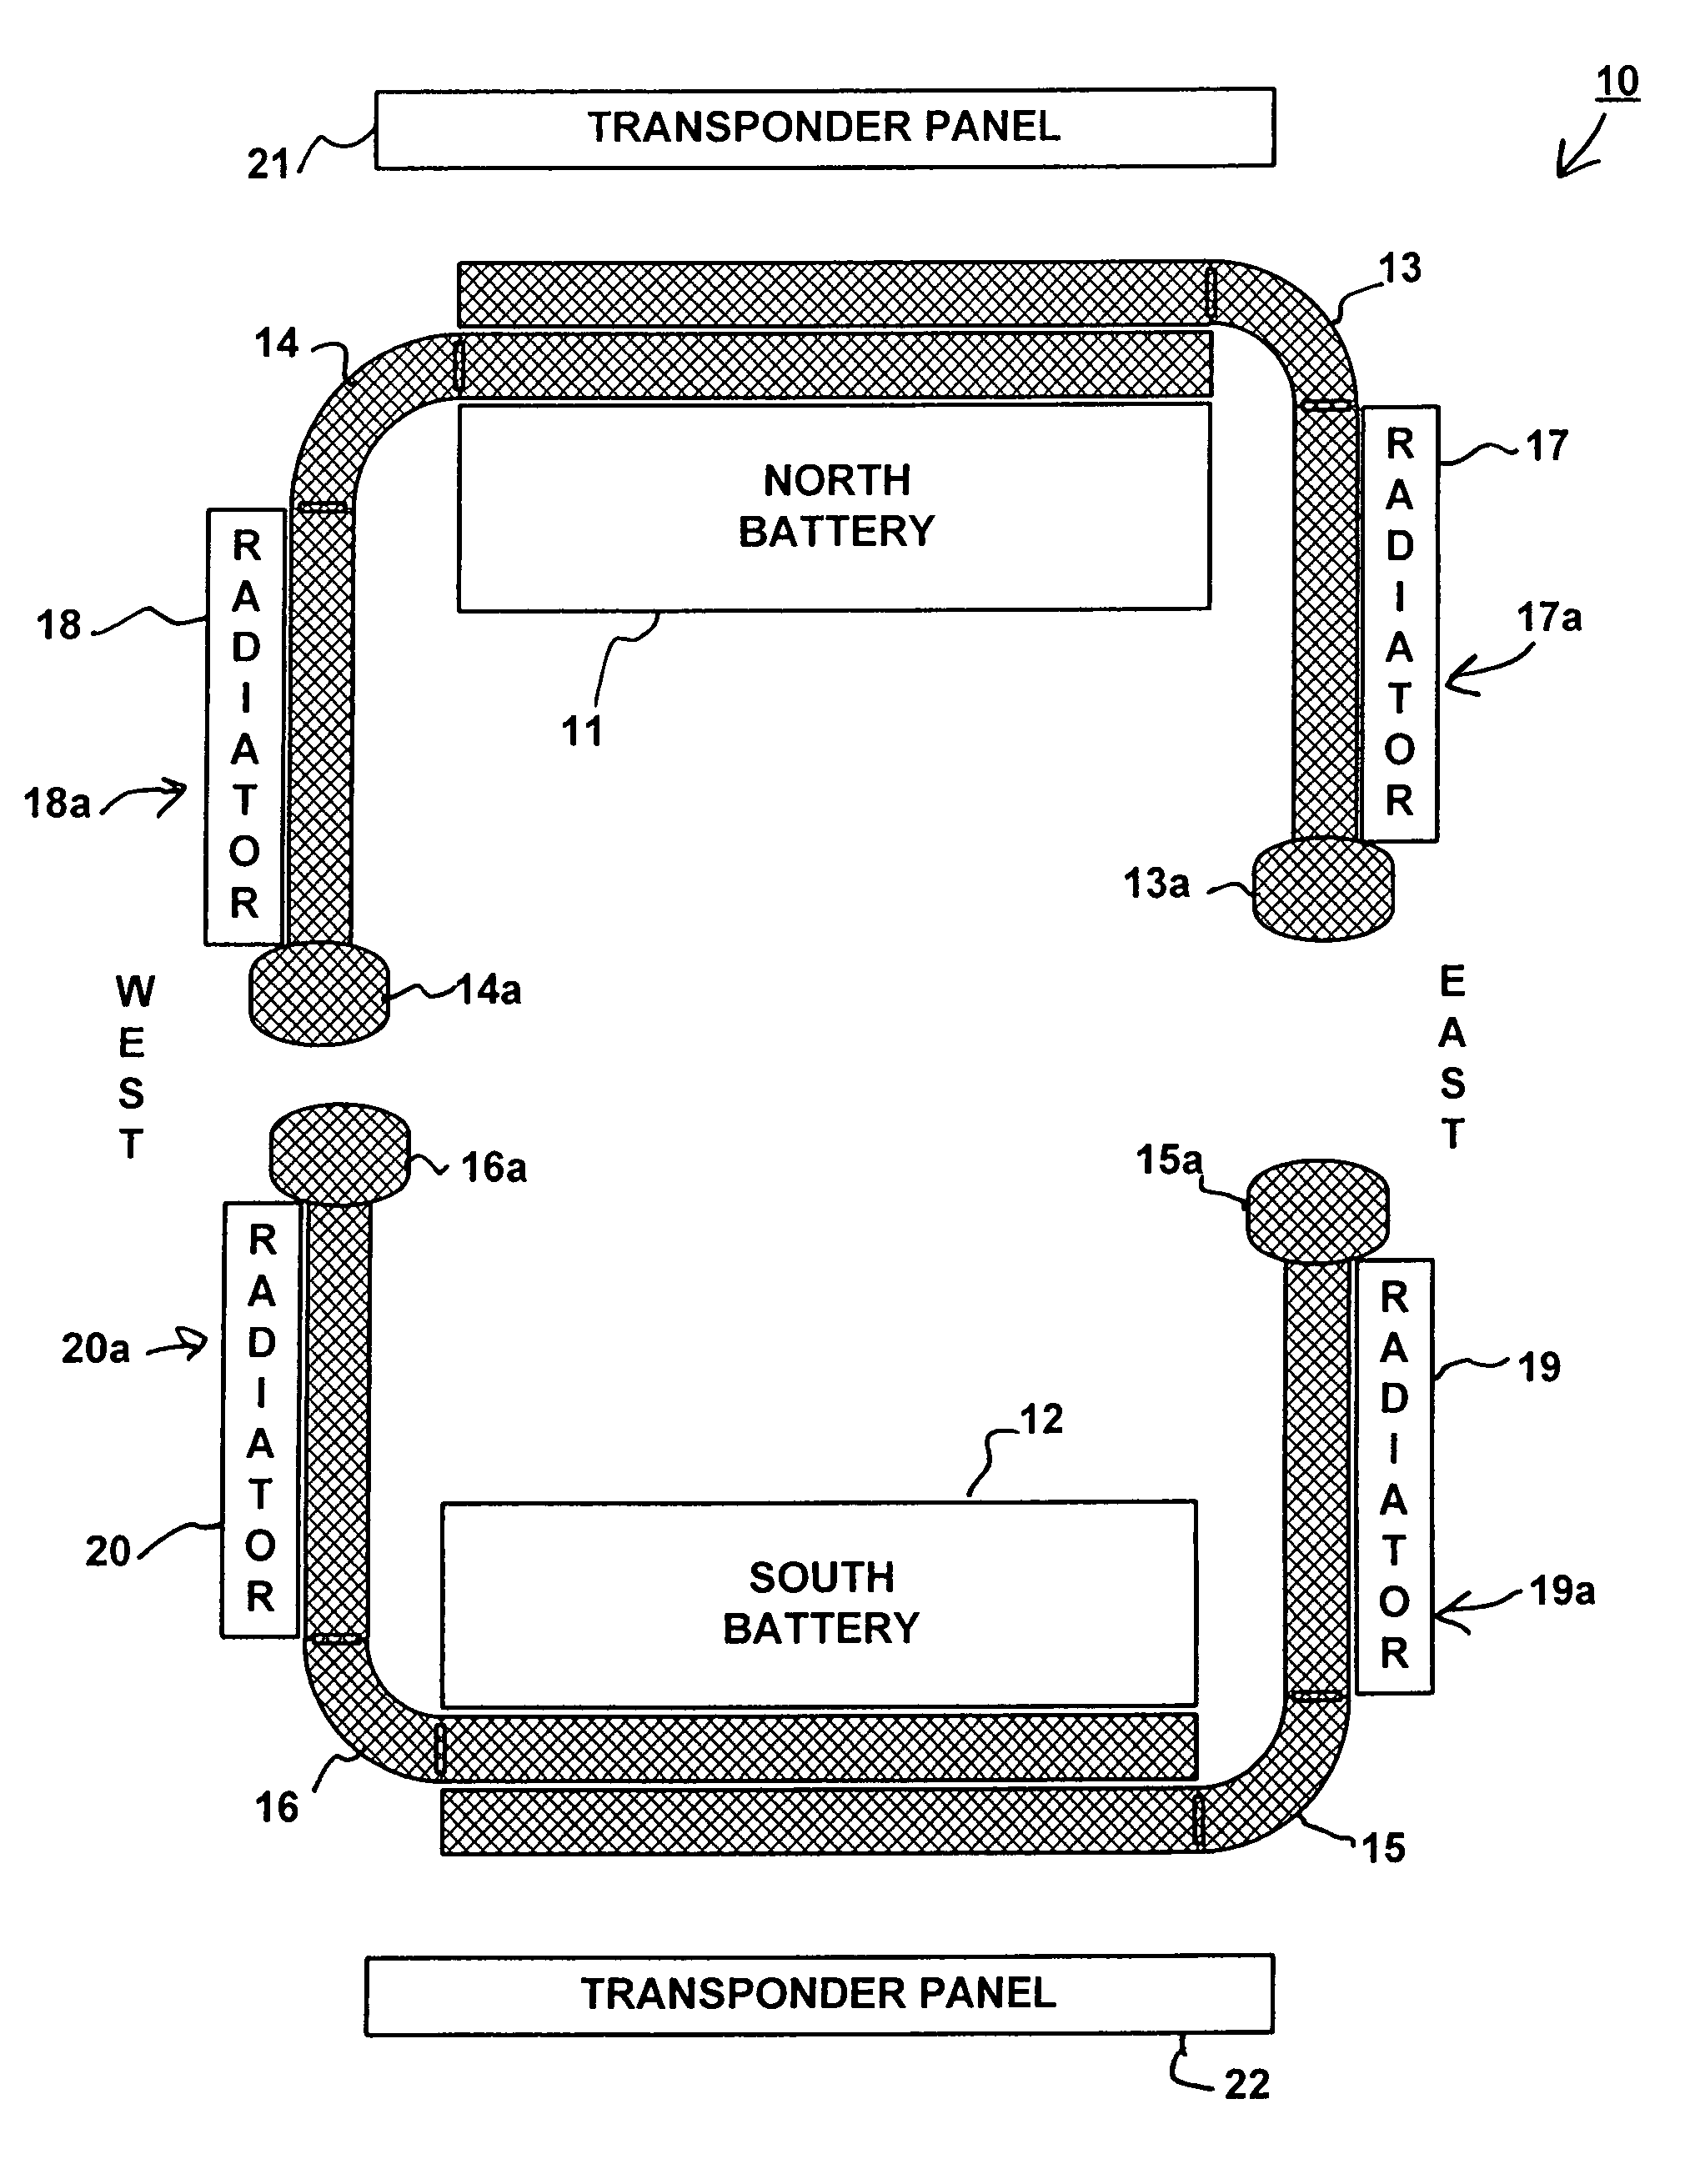 Spacecraft battery thermal management system